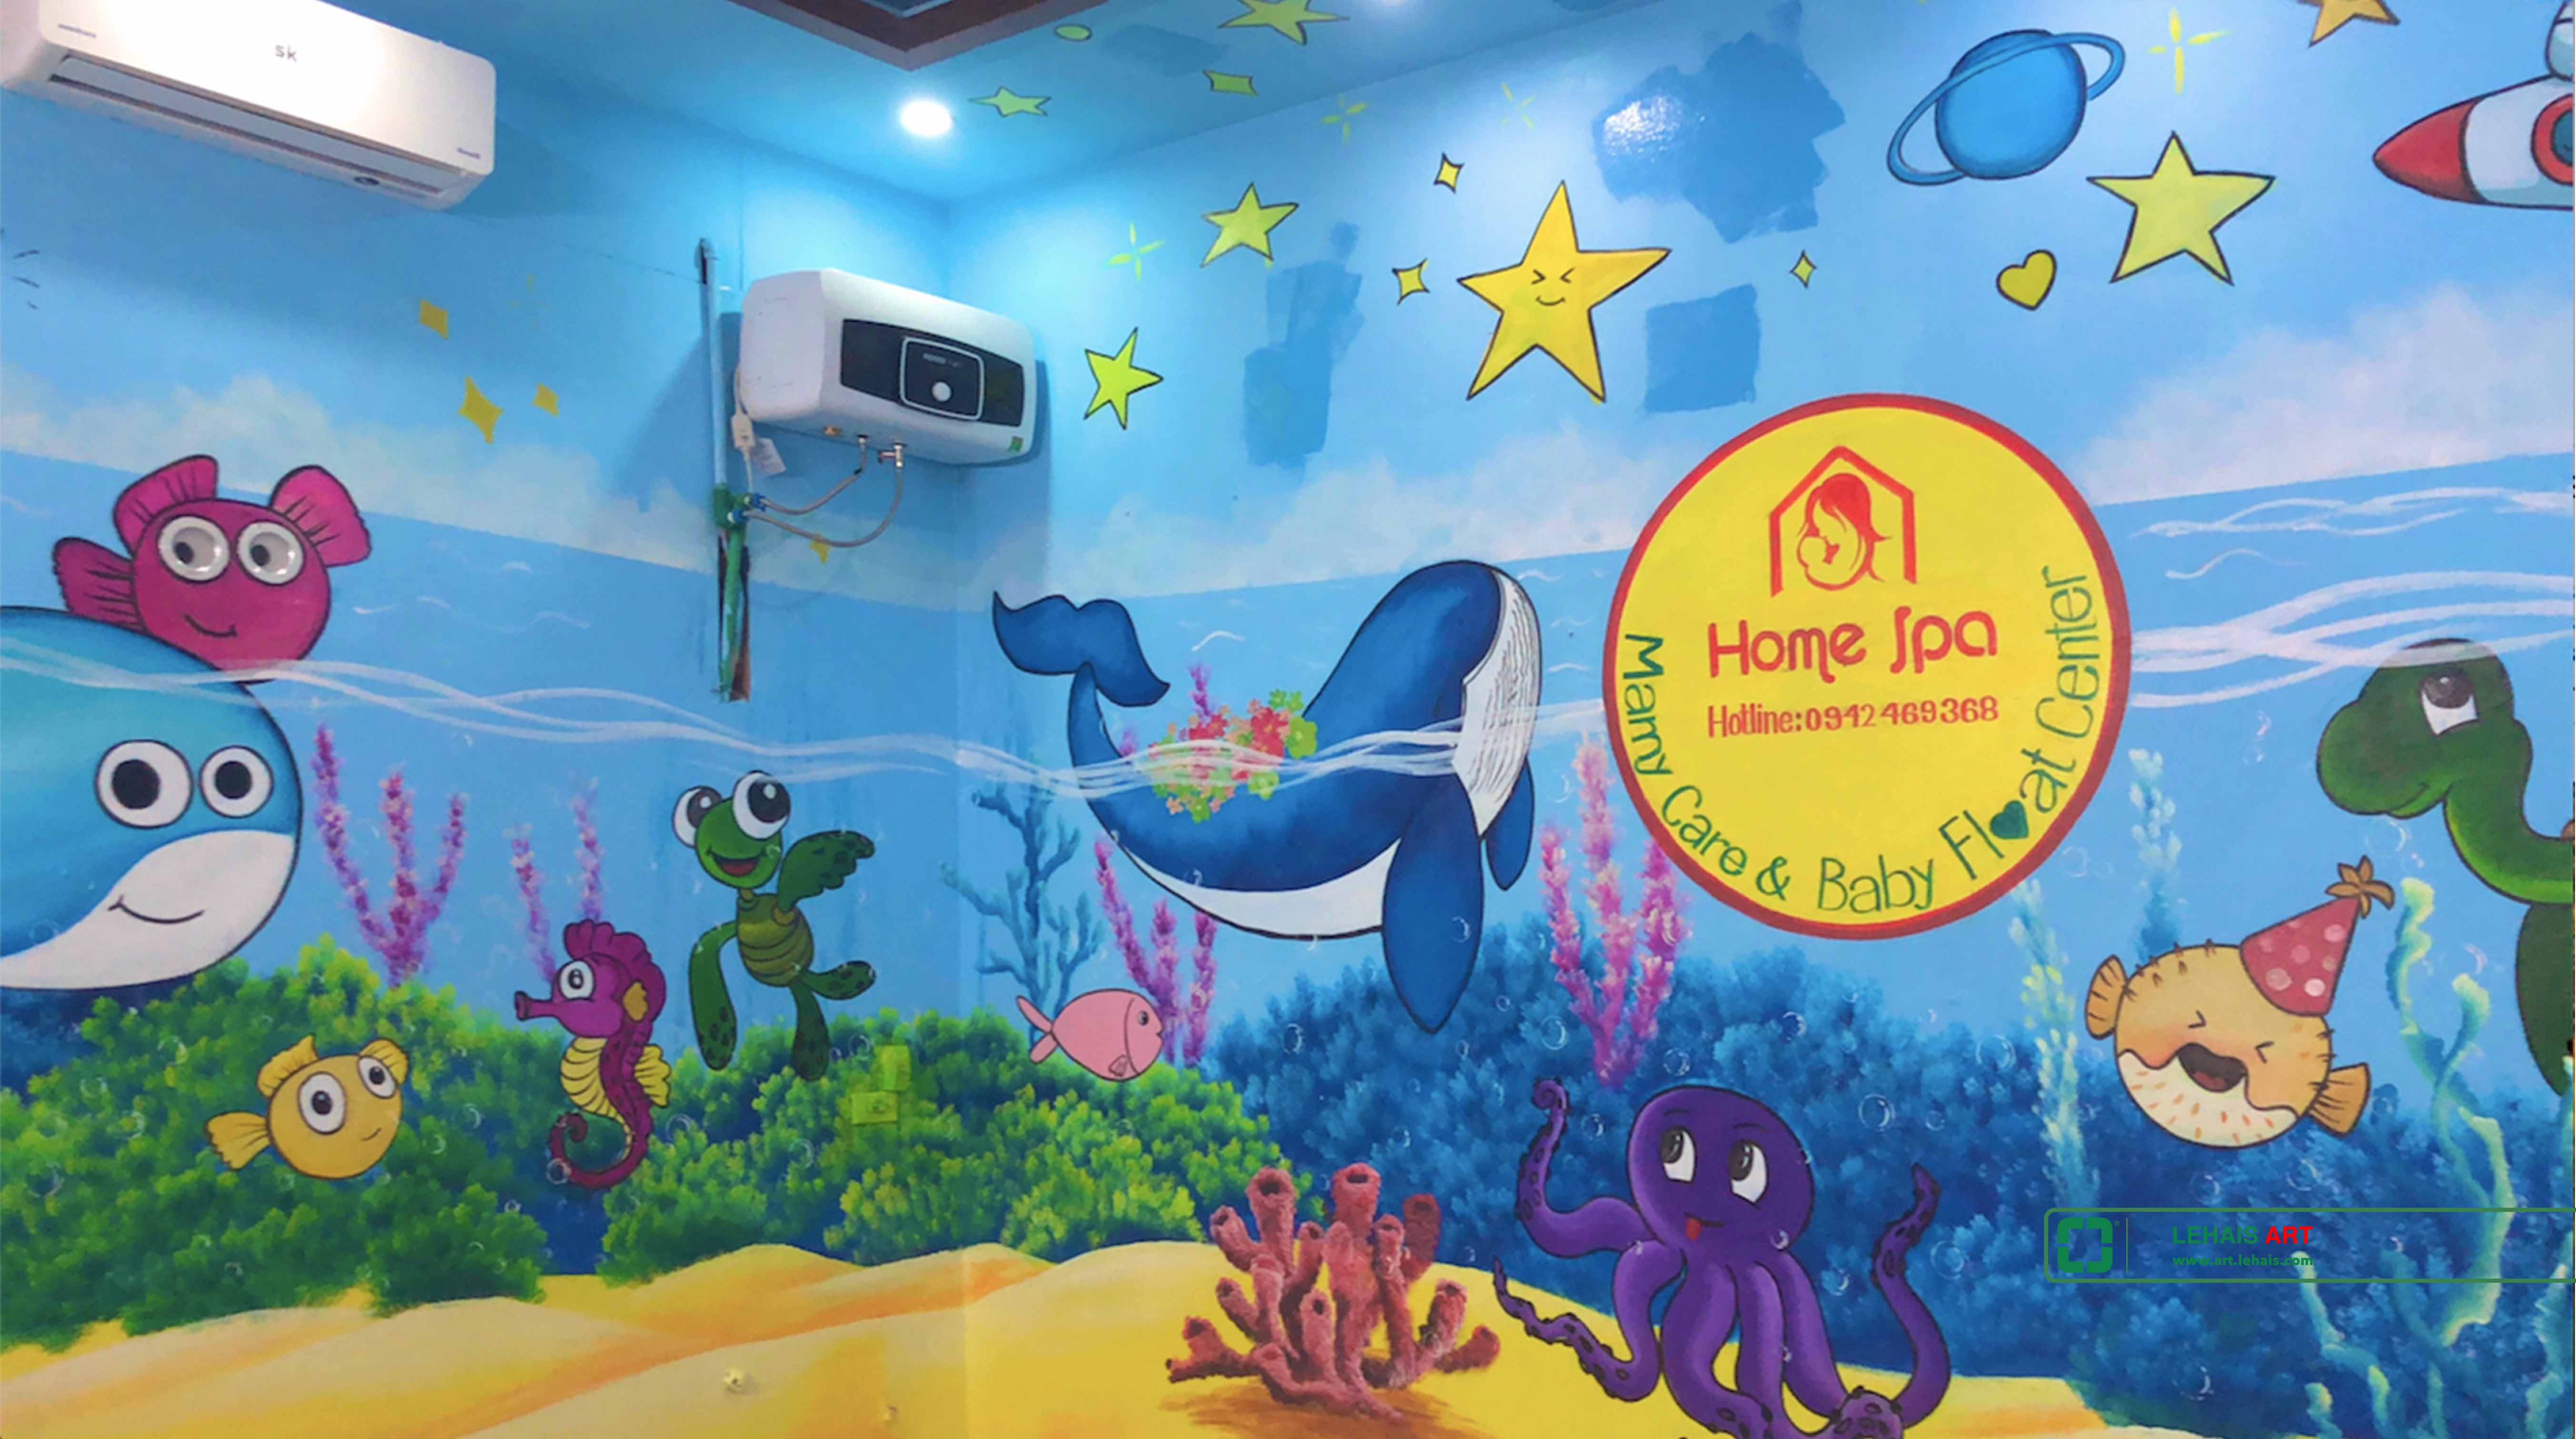 Painting 3D wall decoration at Home Spa in Bac Ninh City - TT200LHAR